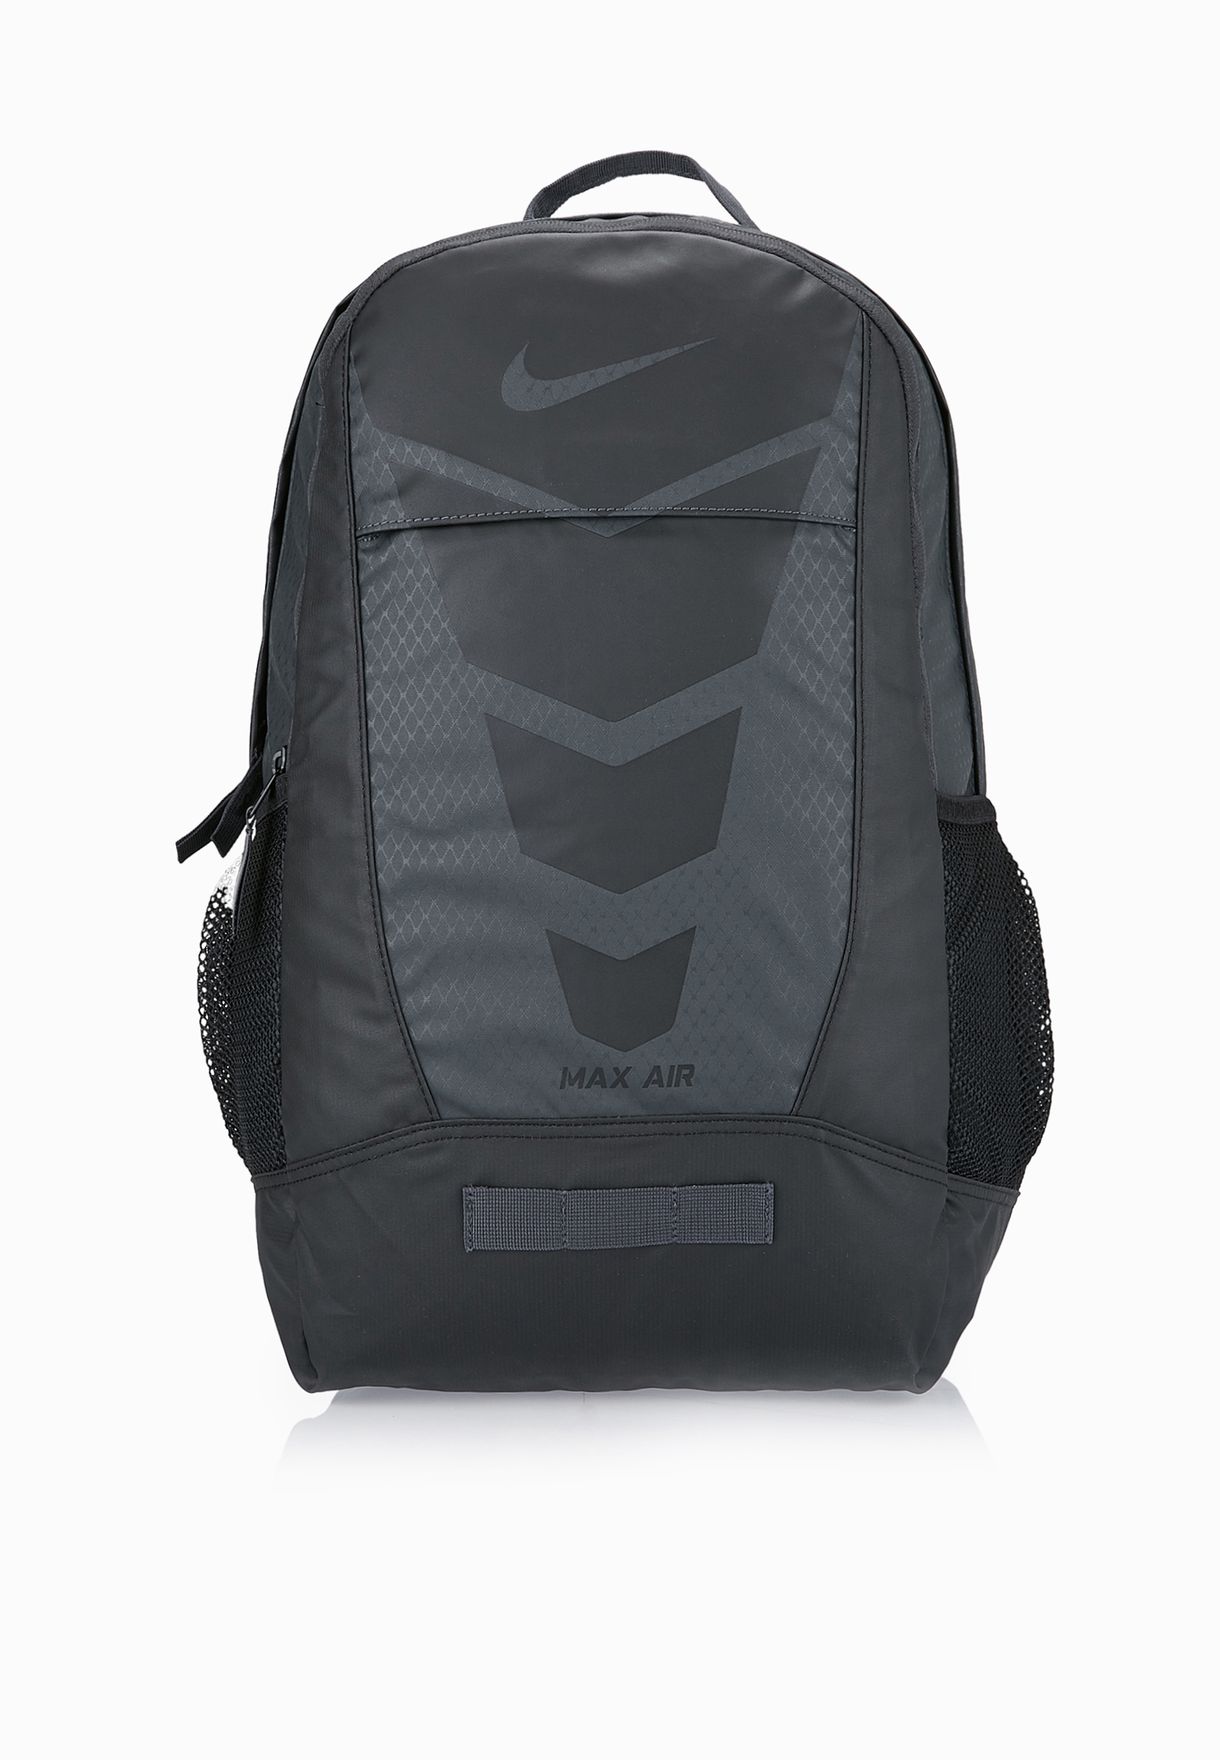 nike max air backpack for sale